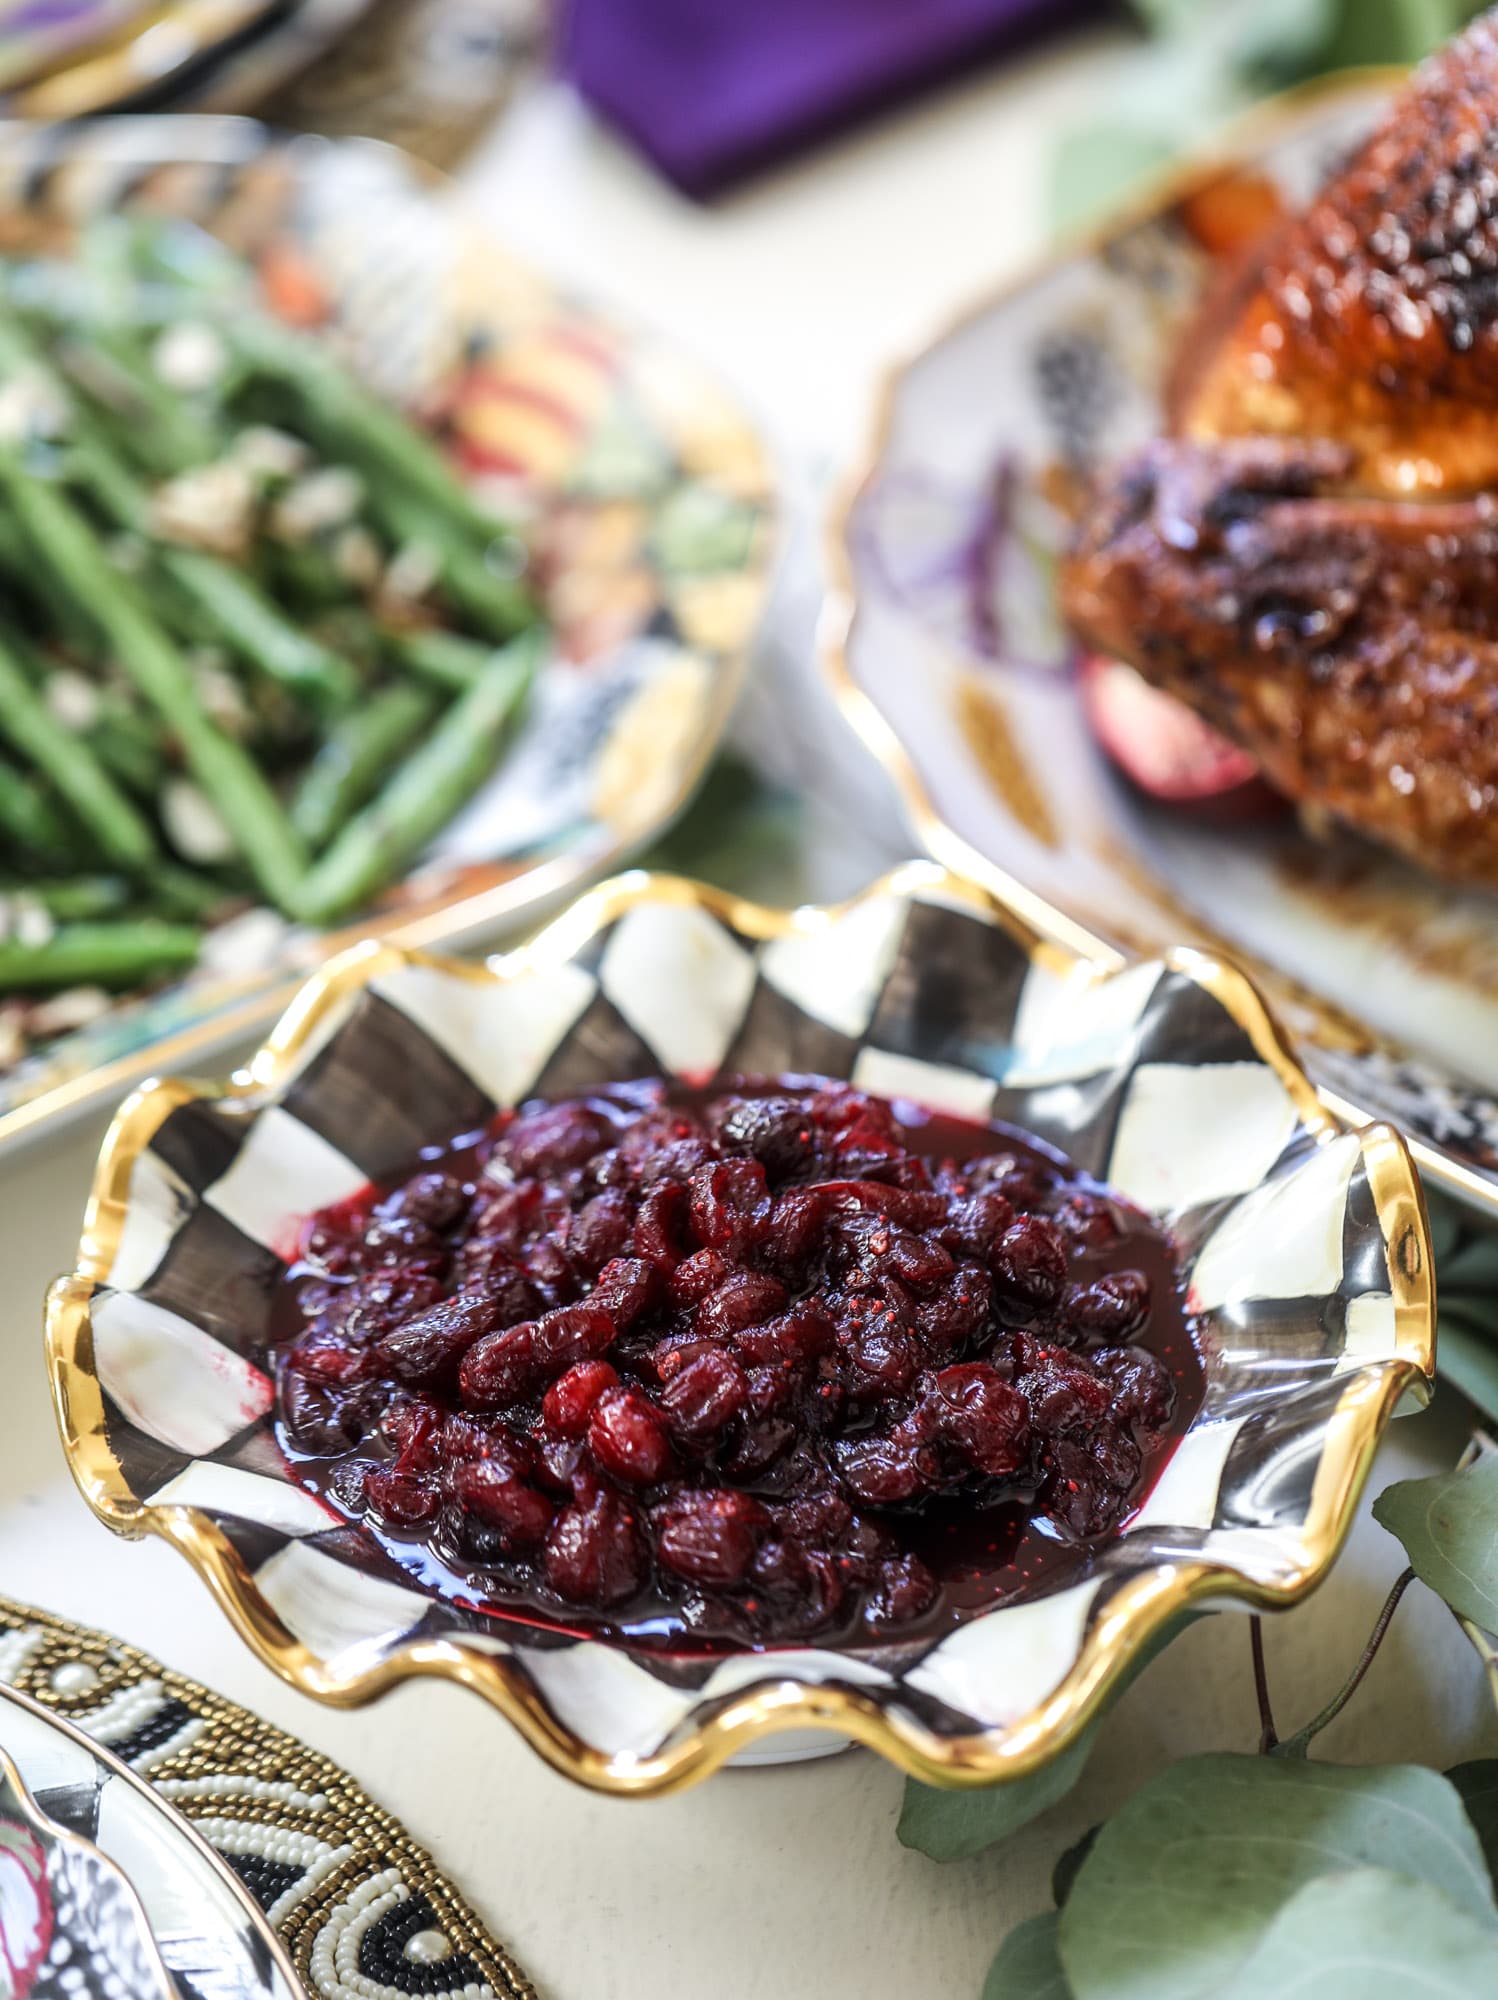 This cranberry chutney is not your traditional Thanksgiving side dish! Chipotle peppers and adobo sauce give this cranberry chutney a little kick - a touch of heat that works so well with the sweet. As a side or spread on sandwiches, it's perfect for the holidays! I howsweeteats.com #cranberry #chutney